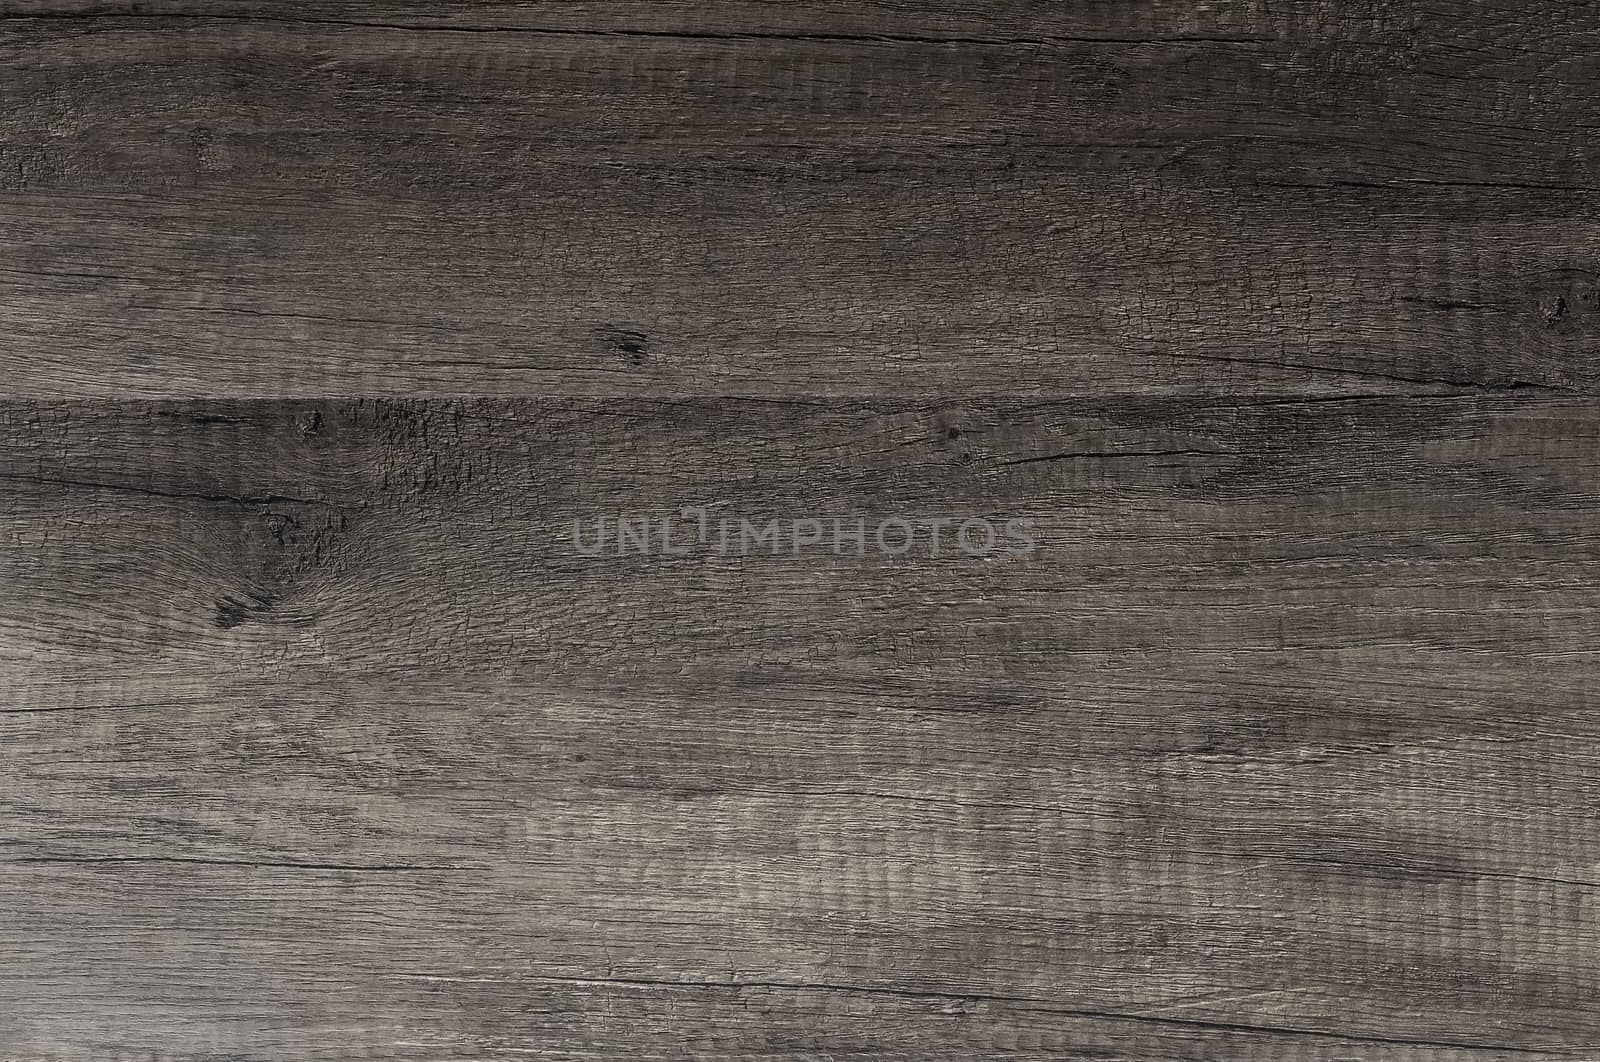 Old wooden textures for background.